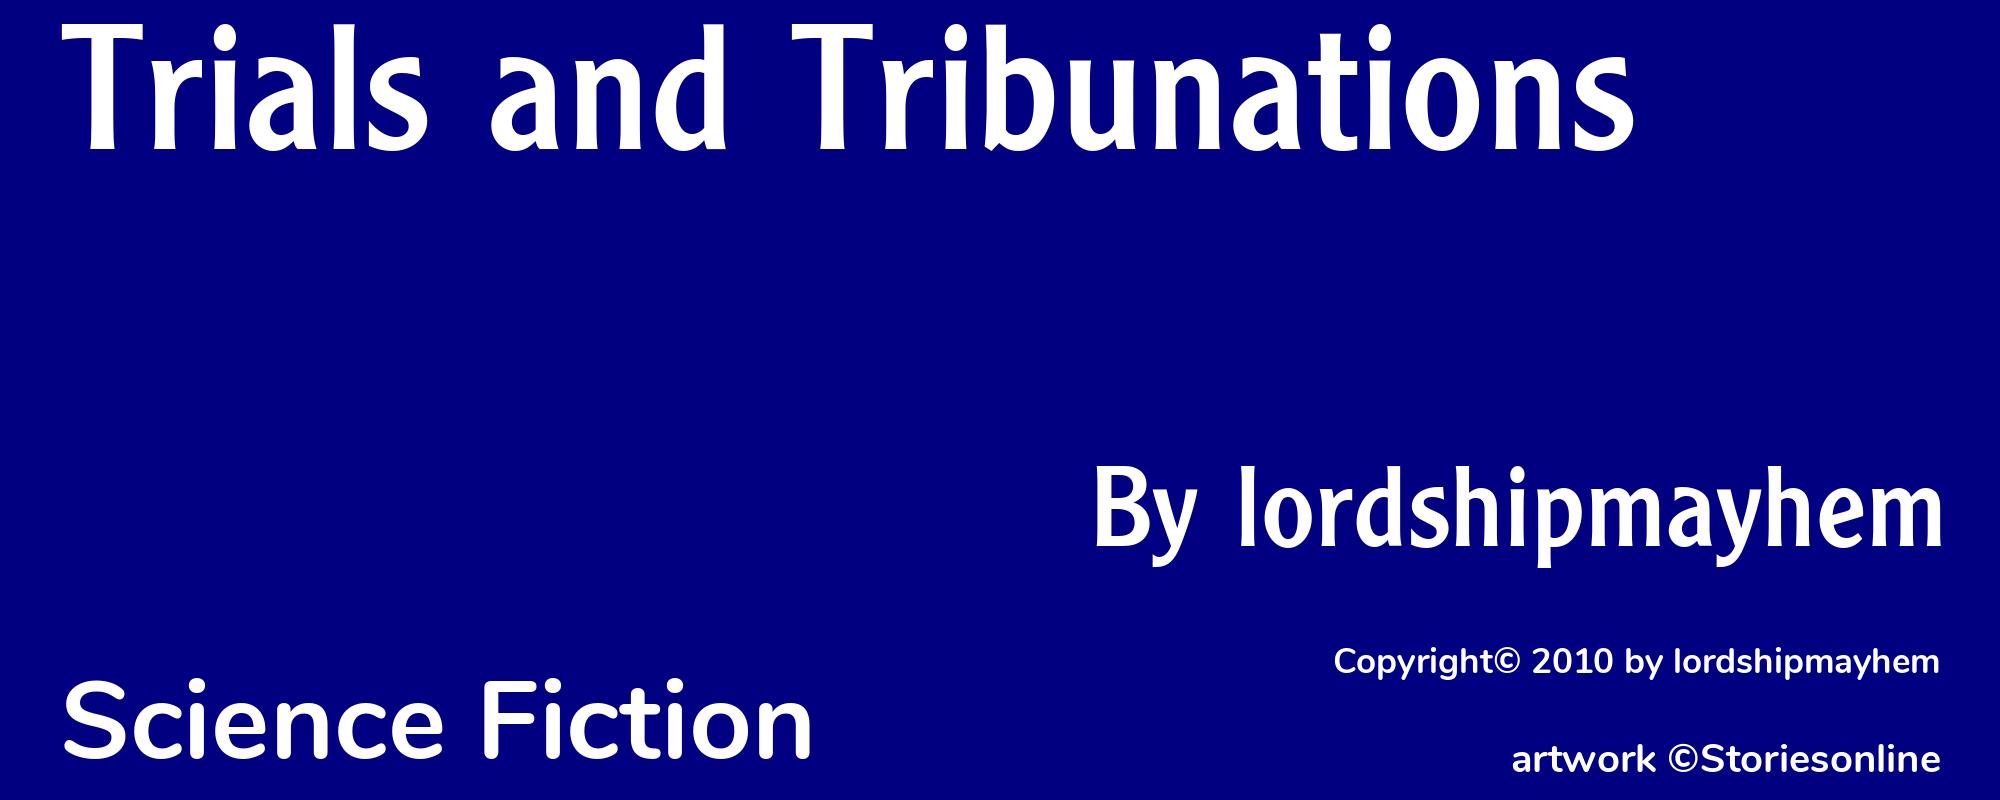 Trials and Tribunations - Cover